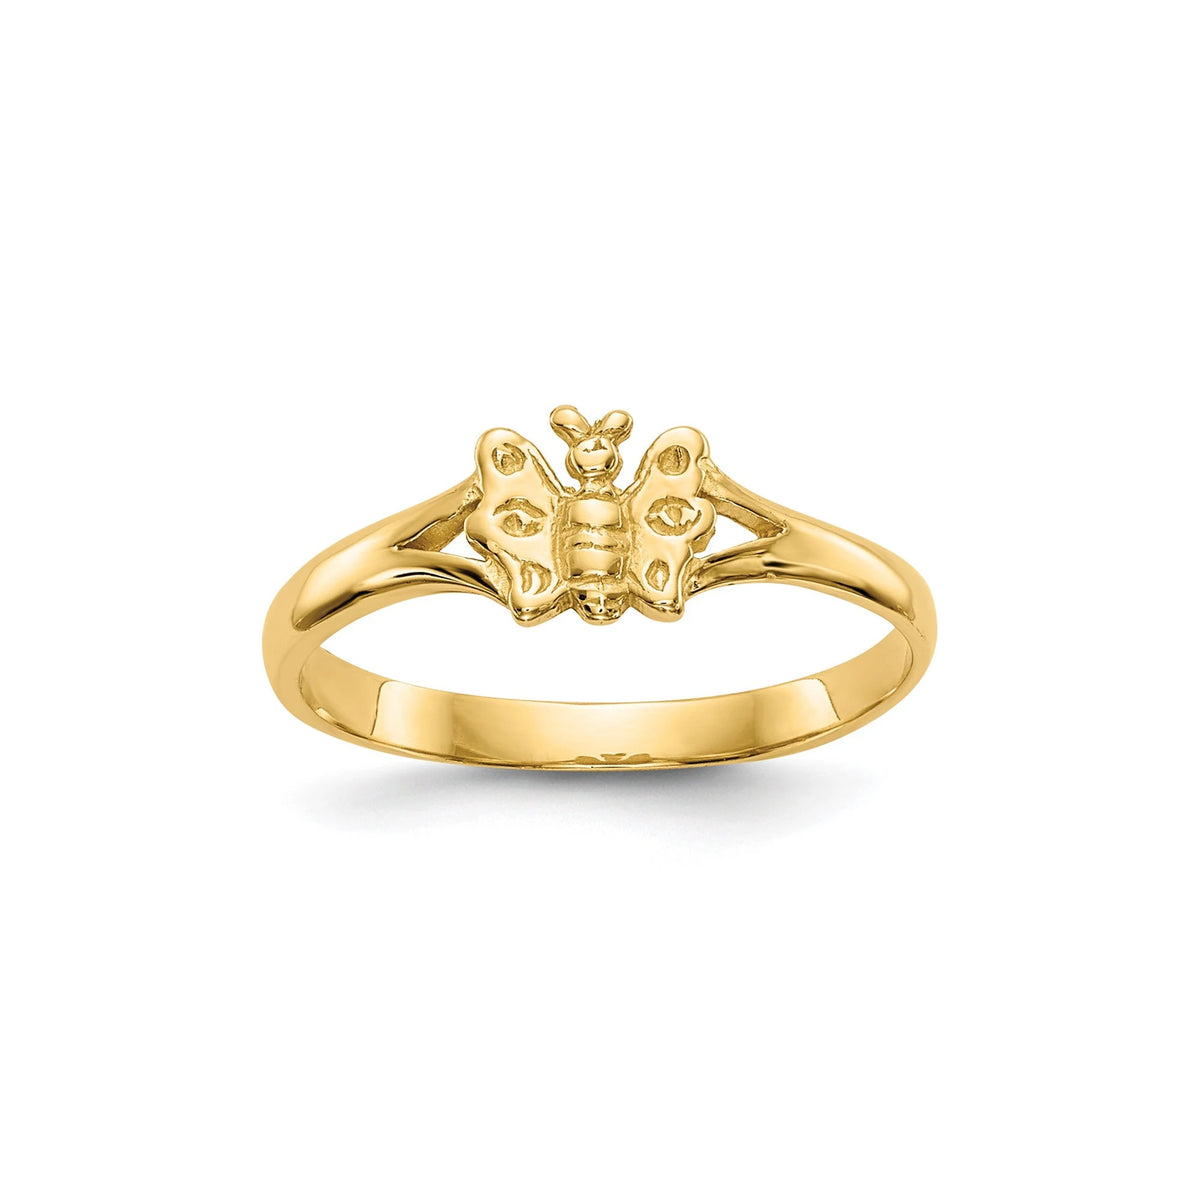 14k Yellow Gold Butterfly Ring Baby to Toddler / Band Size 1- 4 (1-5 year olds) Toddler Size Children's Ring Band